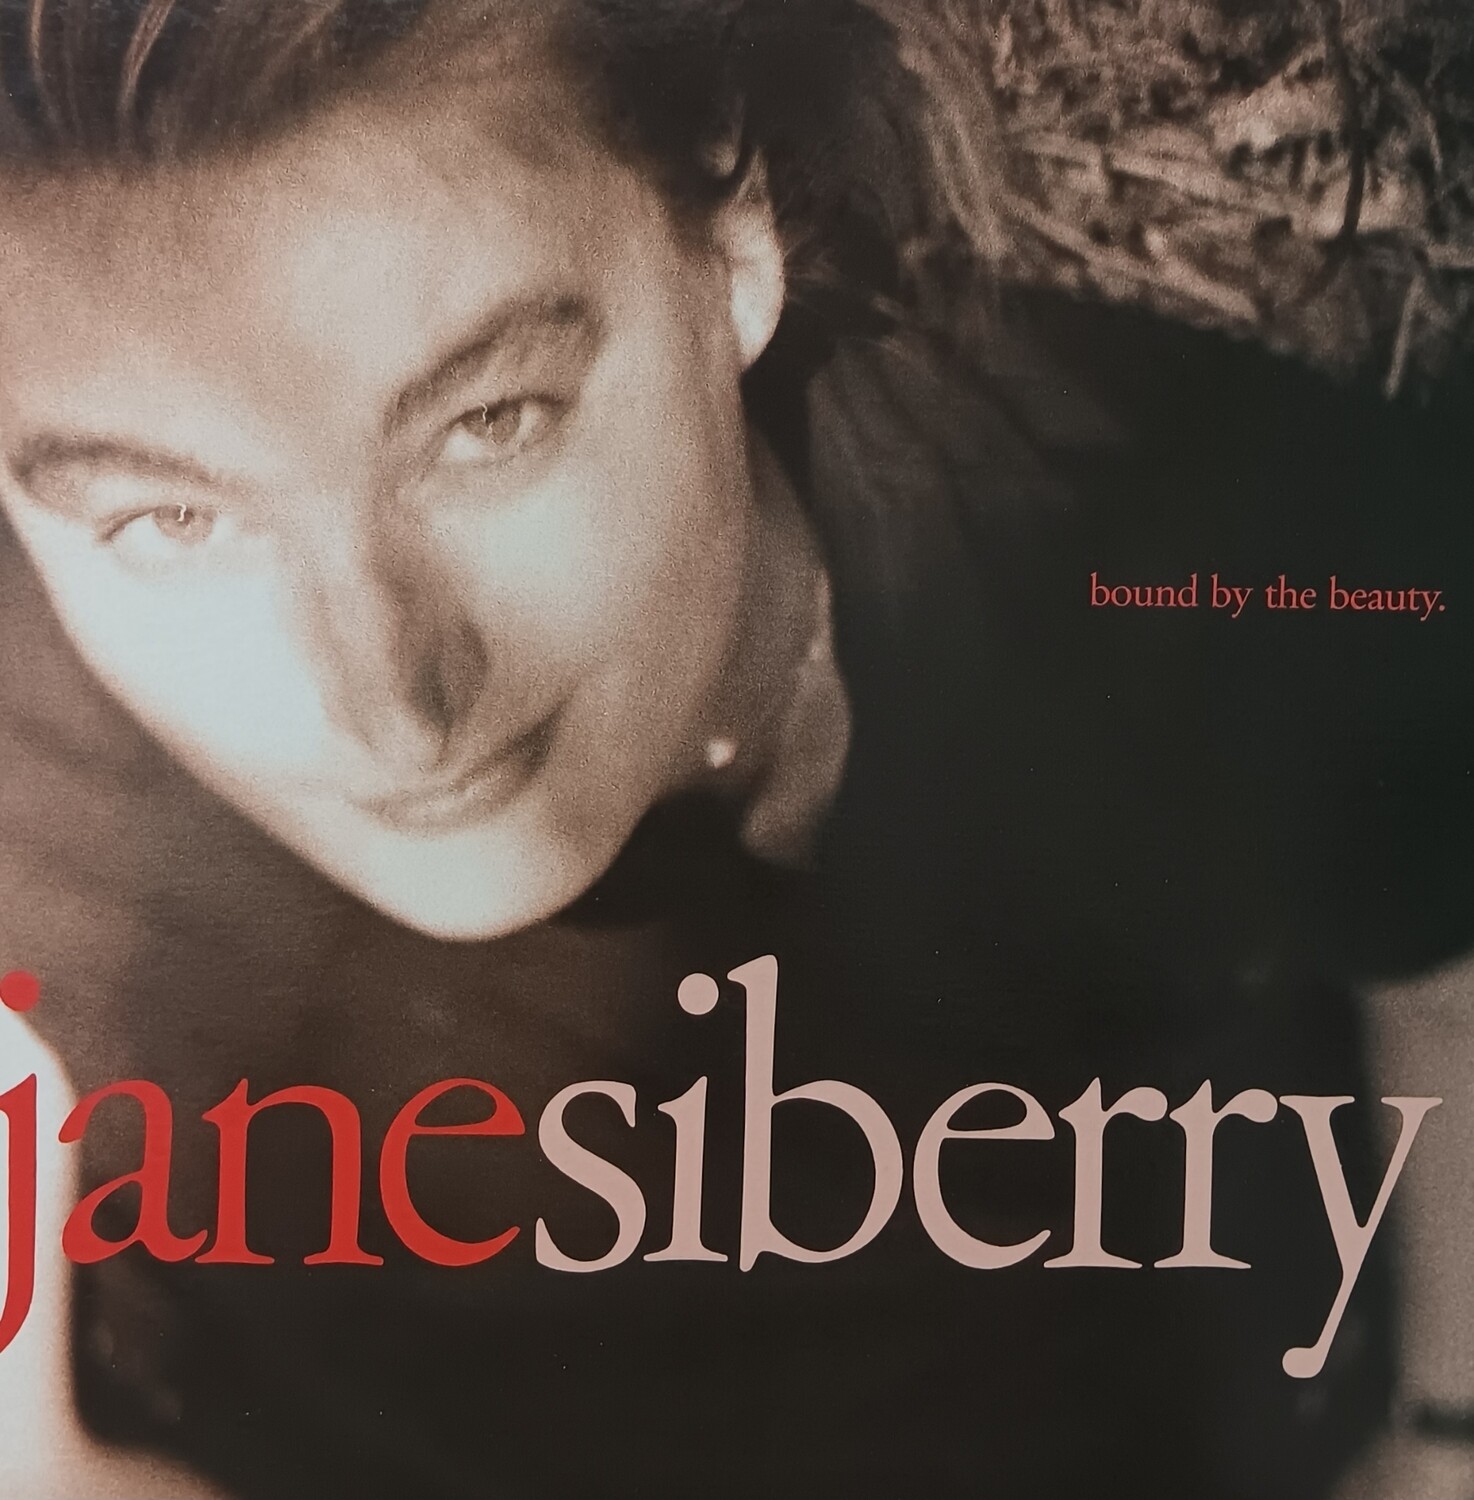 JANE SIBERRY - Bound by the beauty